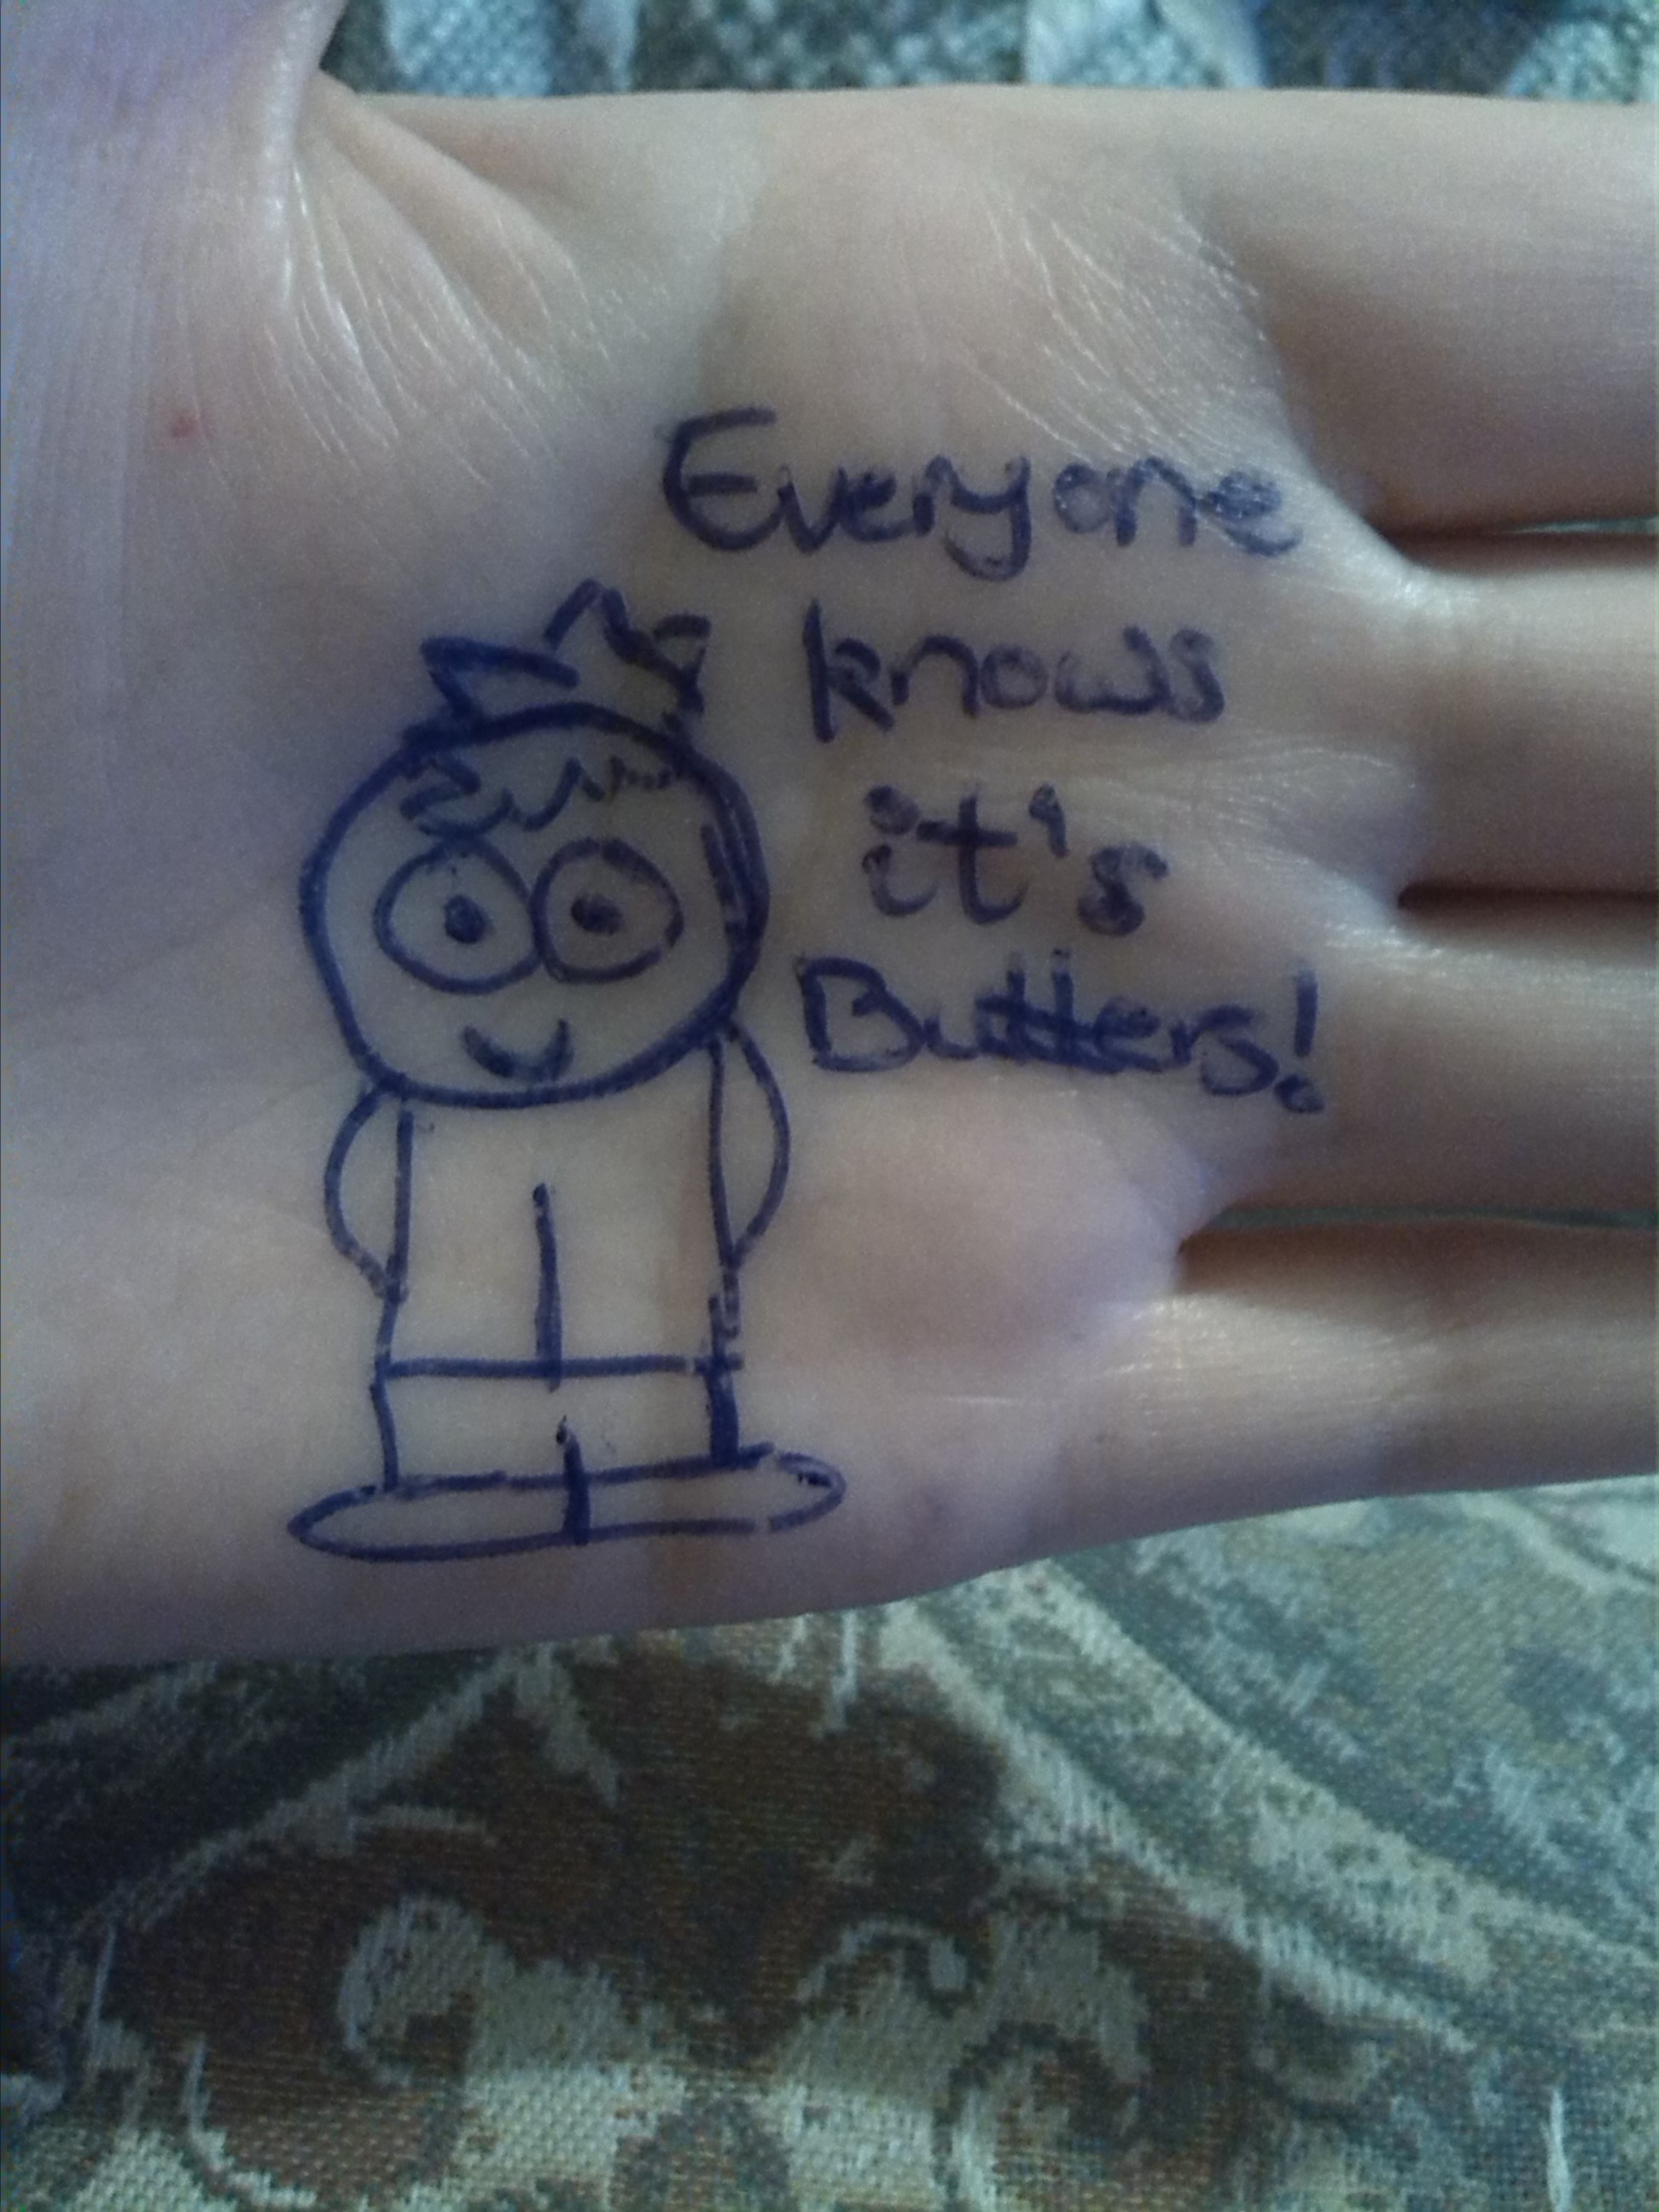 Butters on my hand by Mandarin123